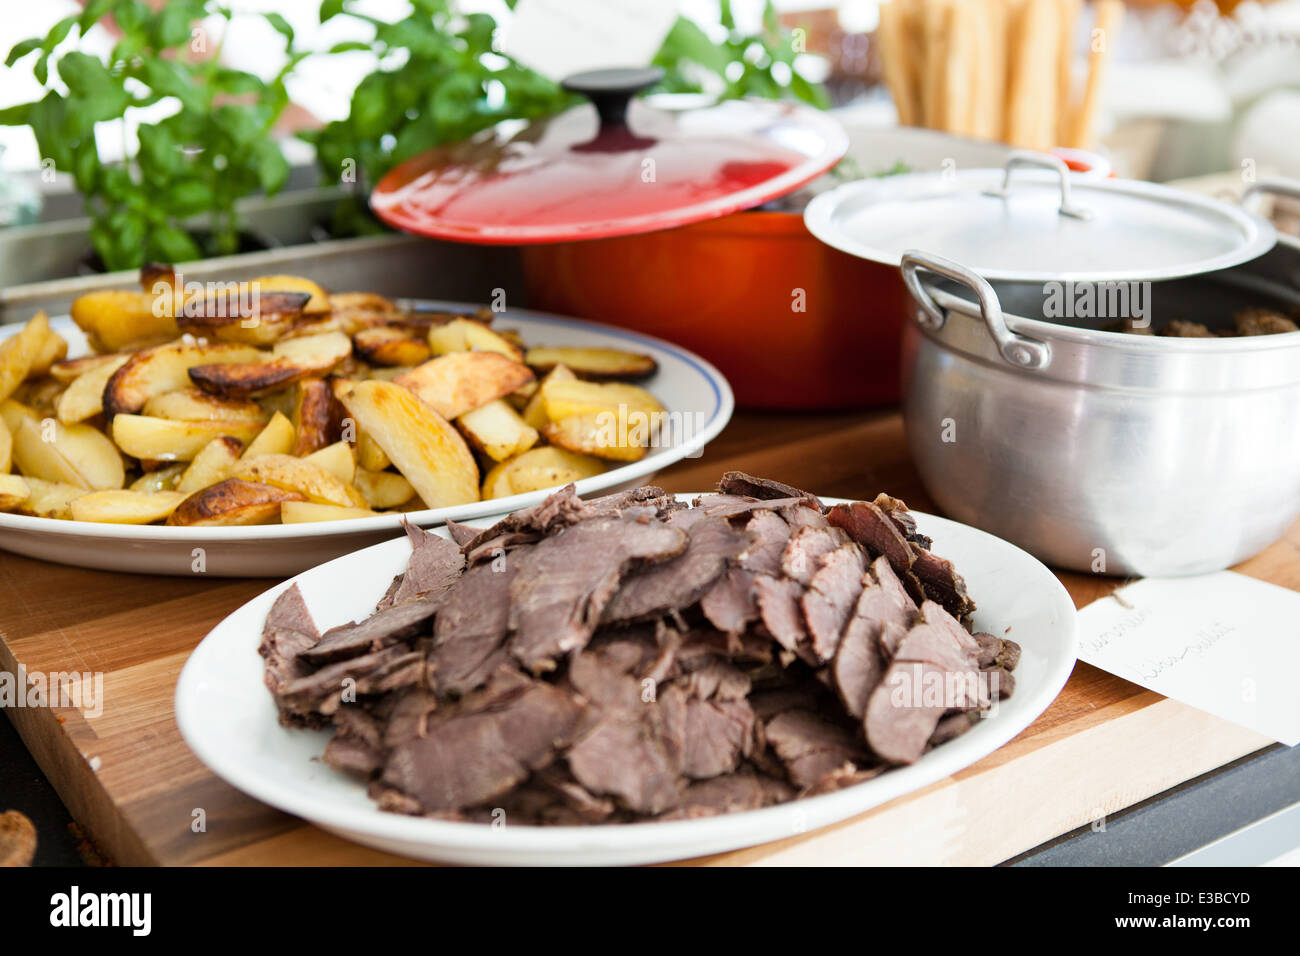 Closeup of plates of cooked meat and thick style french fries on table ready for serving at dinner party Stock Photo